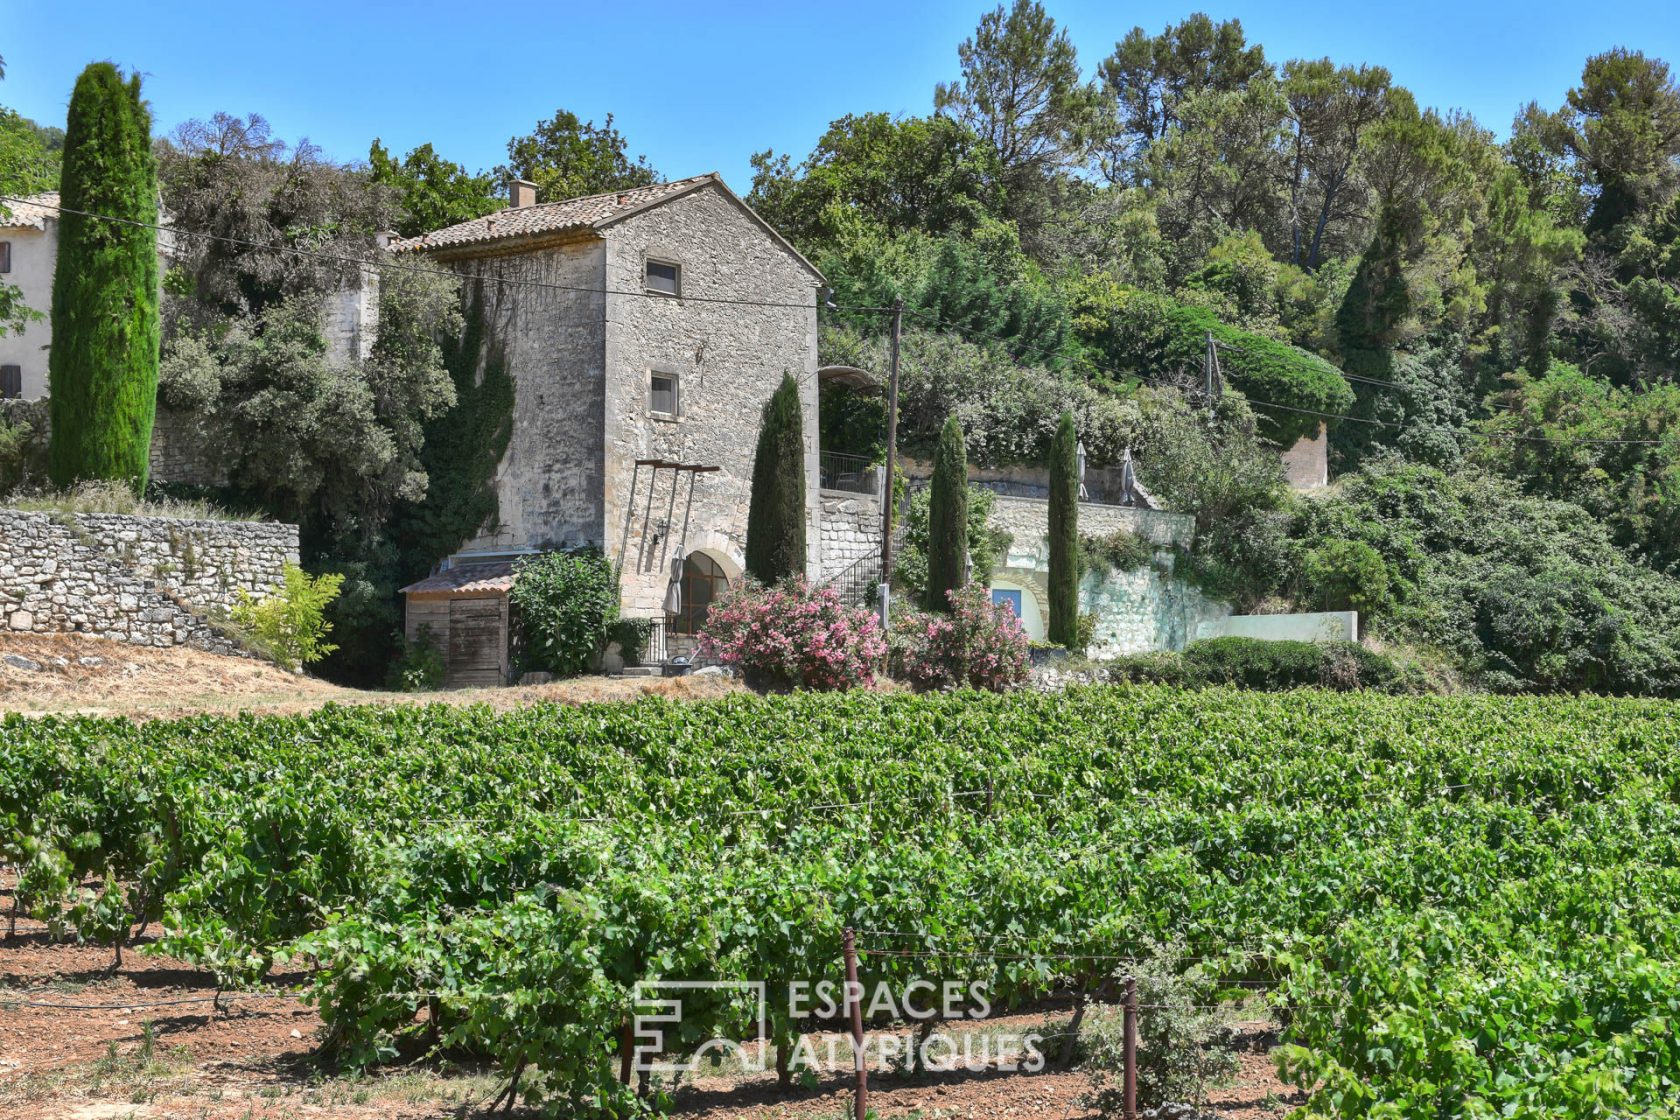 Little gem in the heart of the Luberon